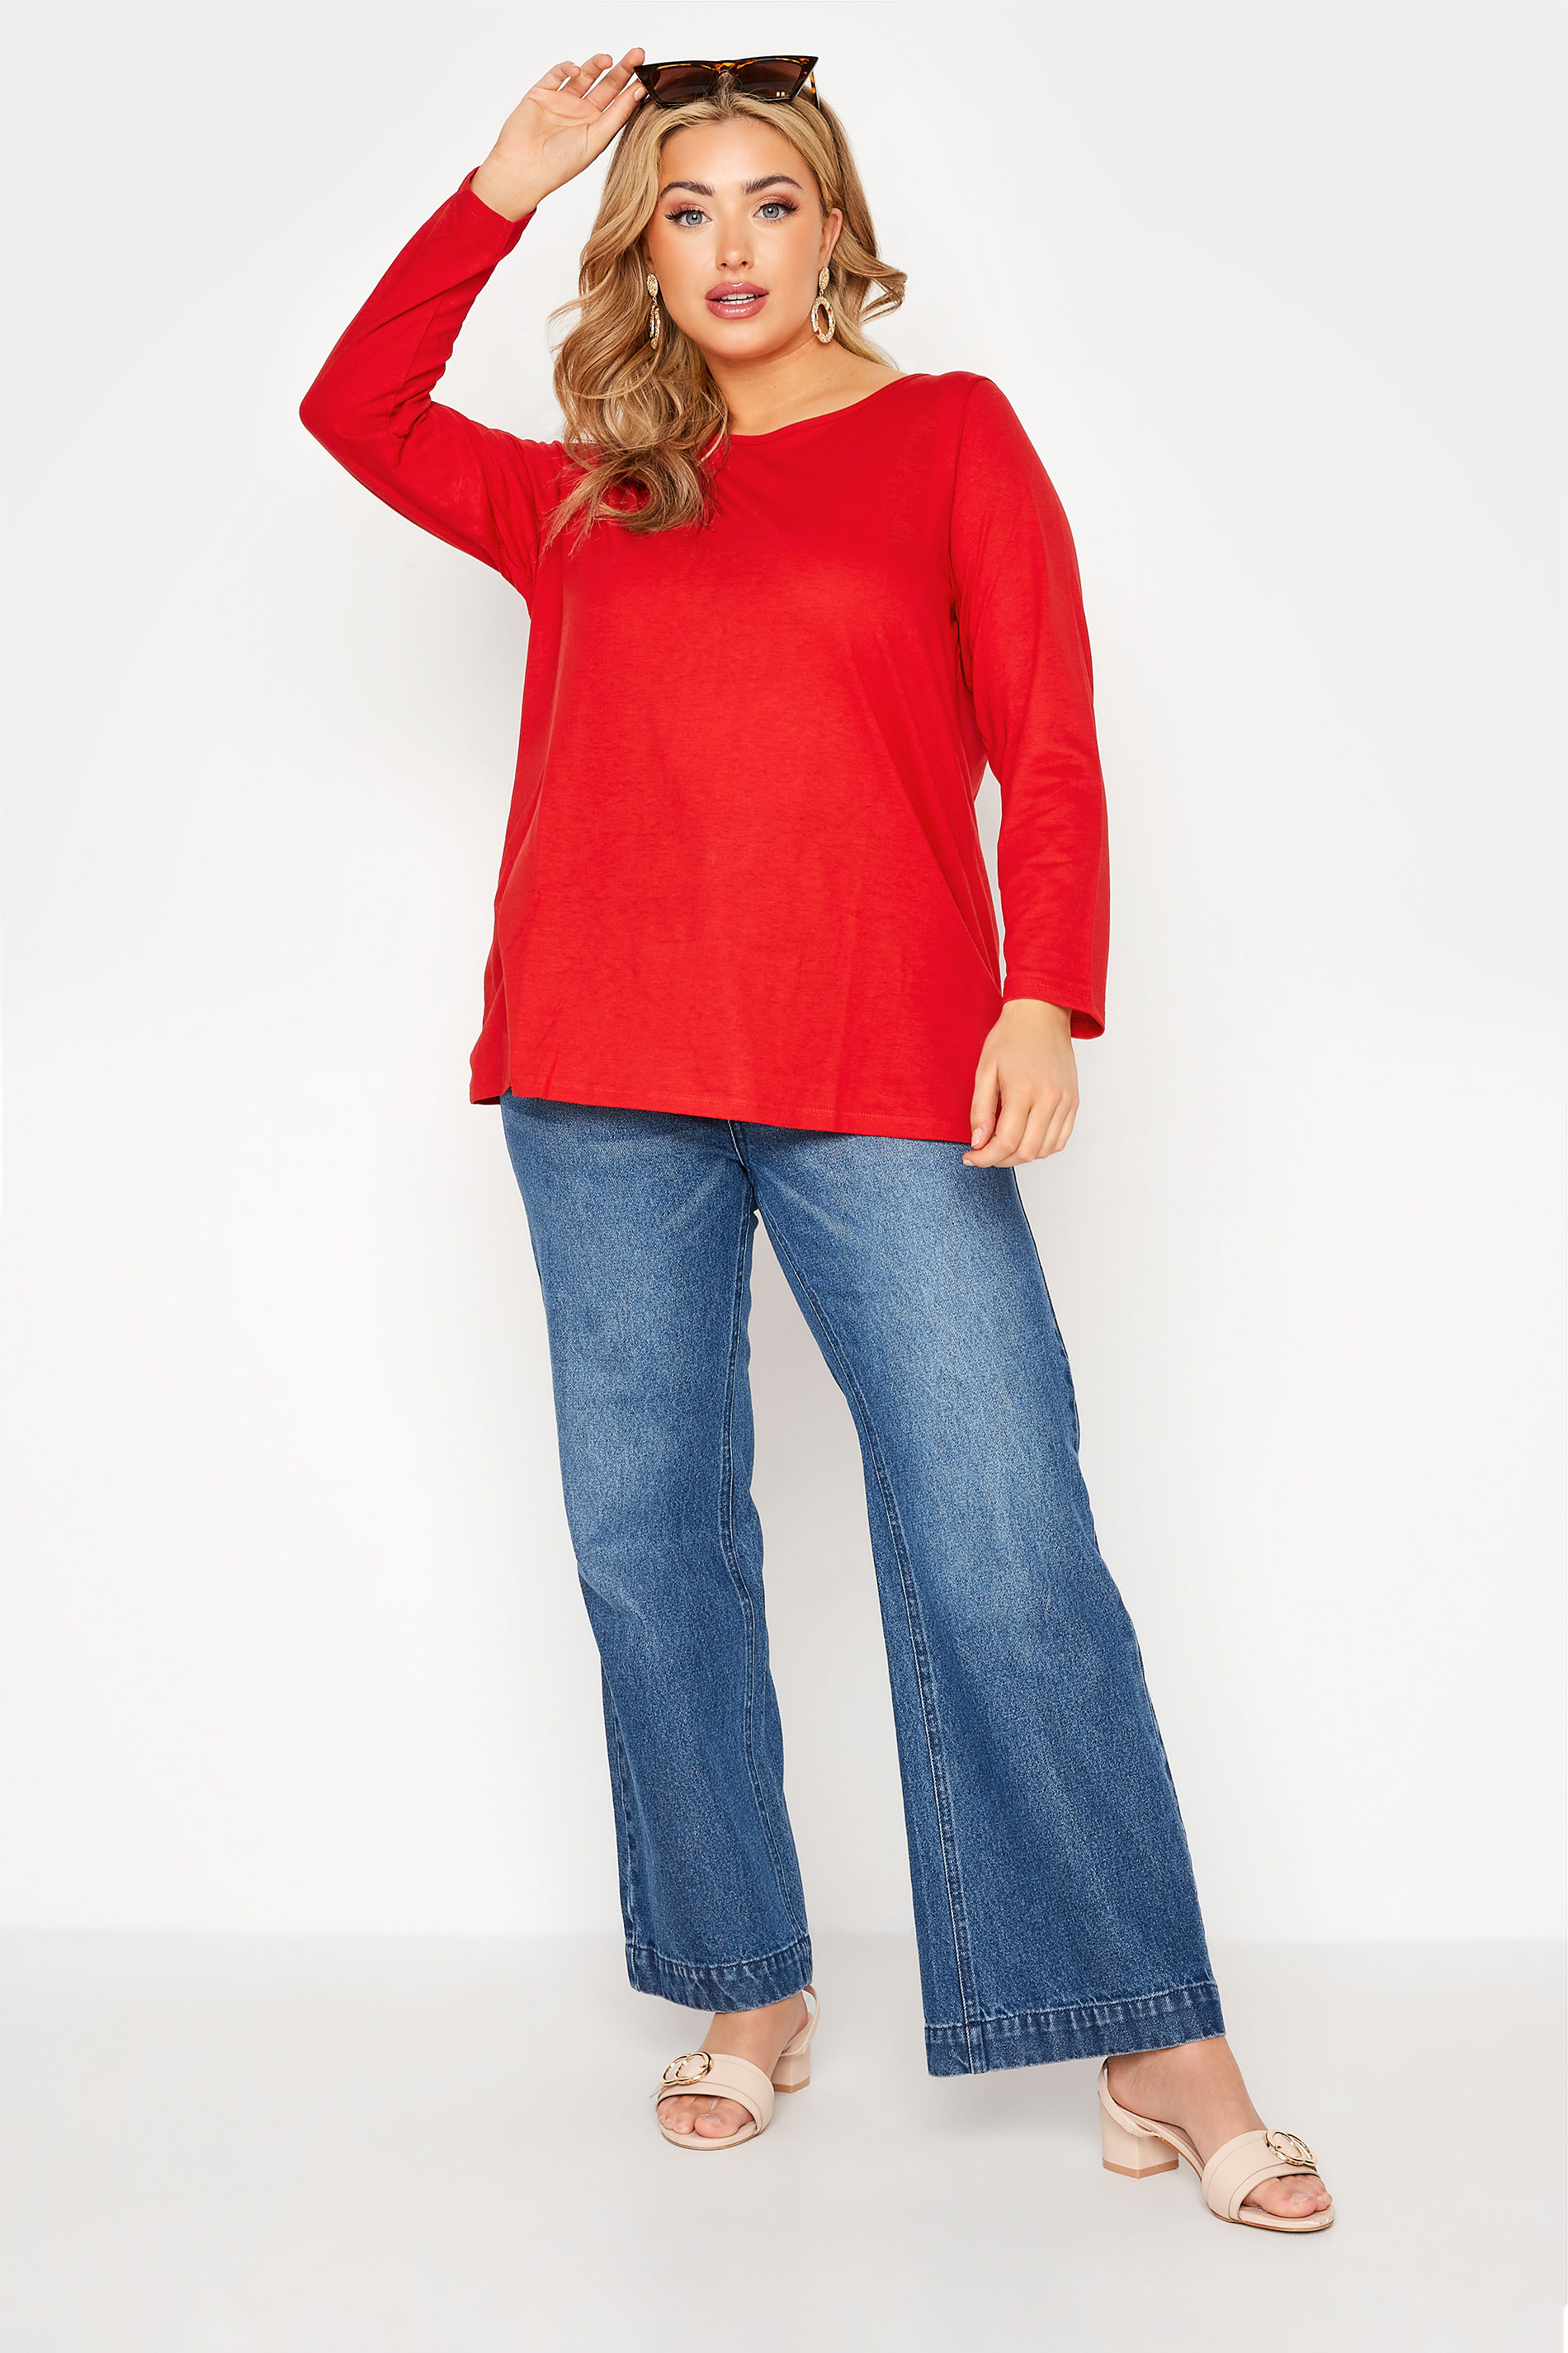 Grande taille  Tops Grande taille  T-Shirts | T-Shirt Rouge Manches Longues en Jersey - LE04538